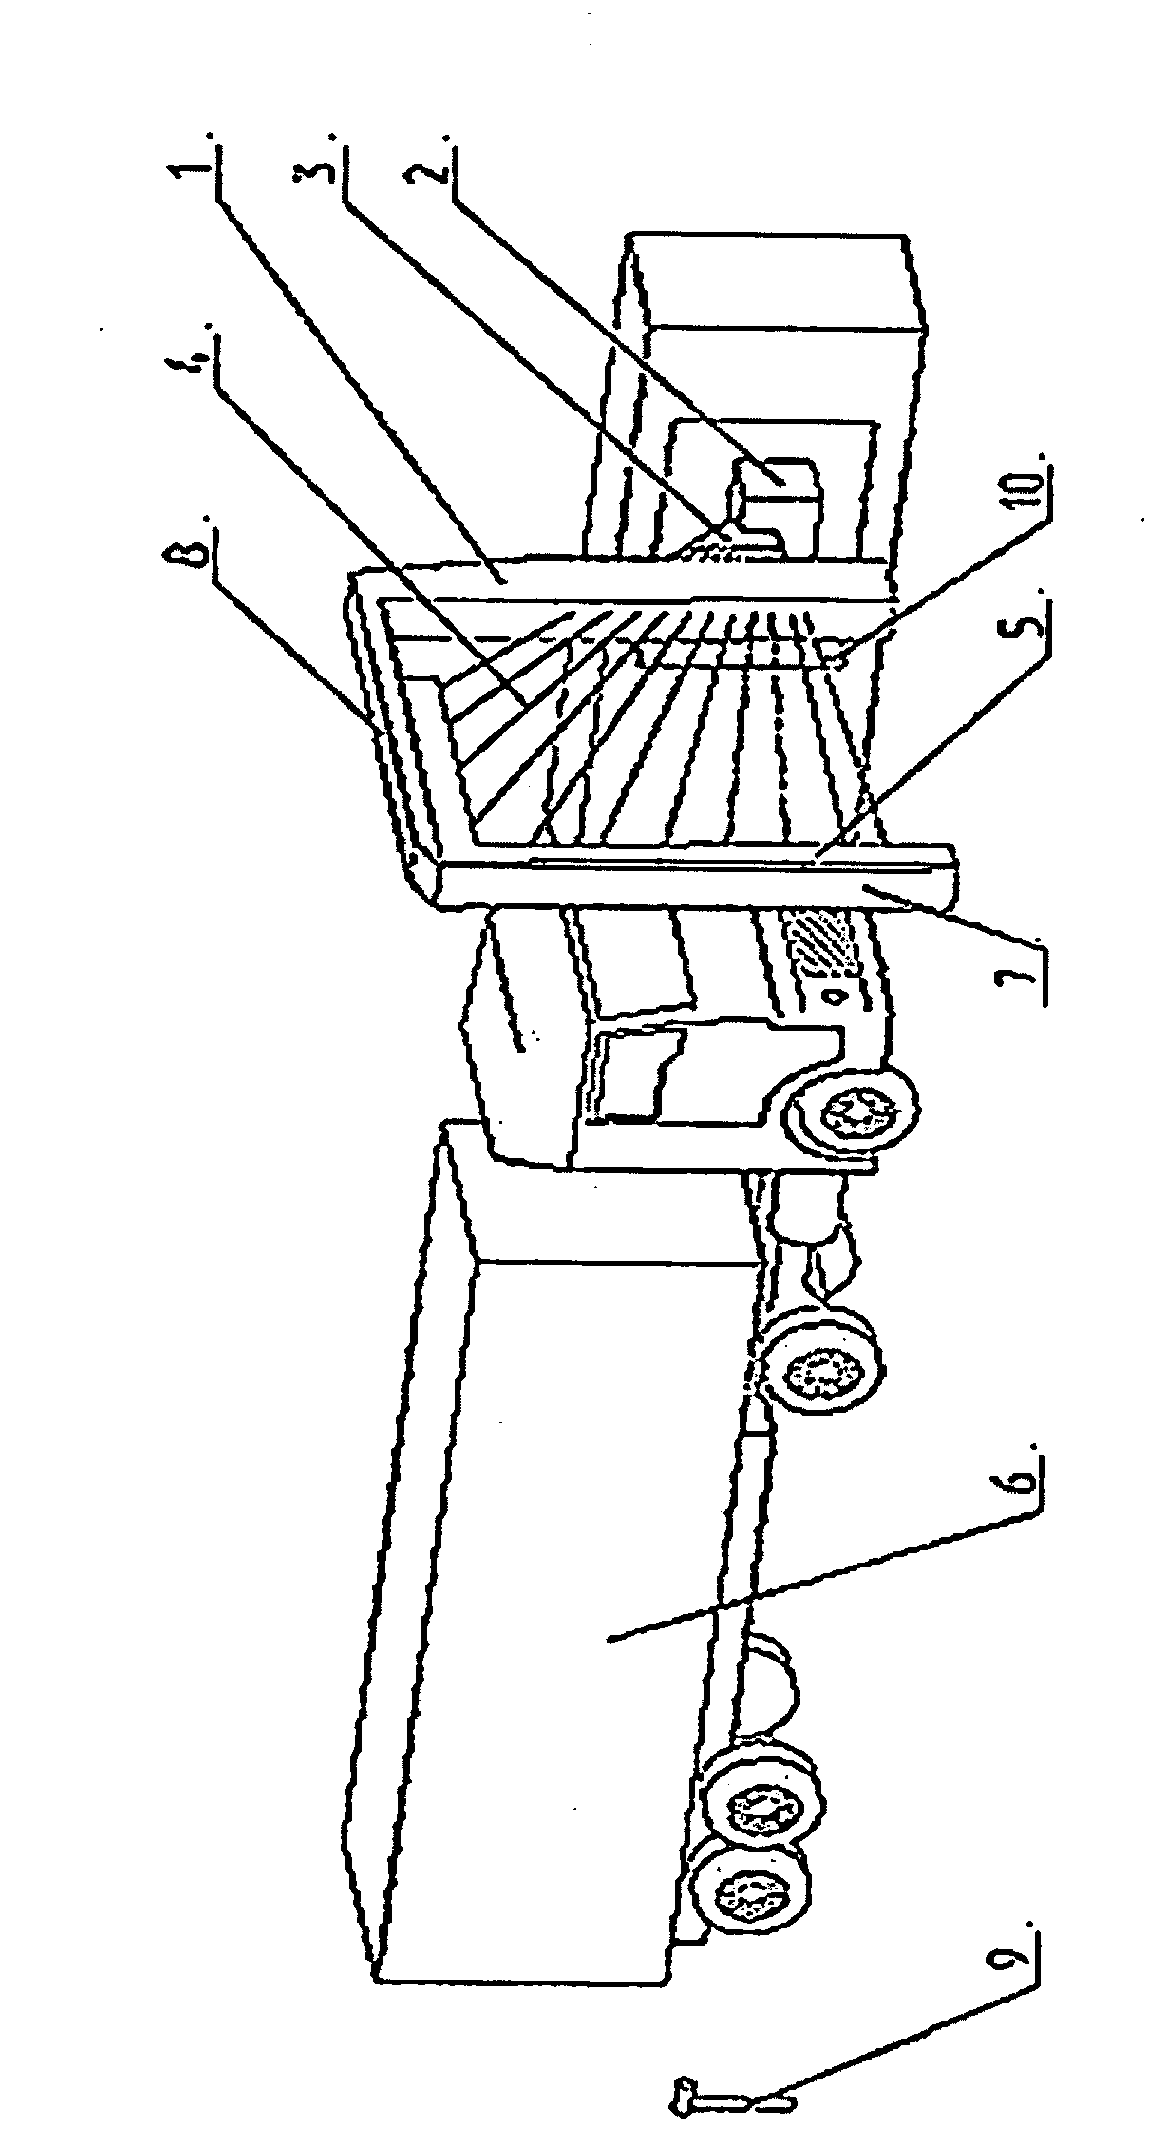 Cargo and vehicle inspection system